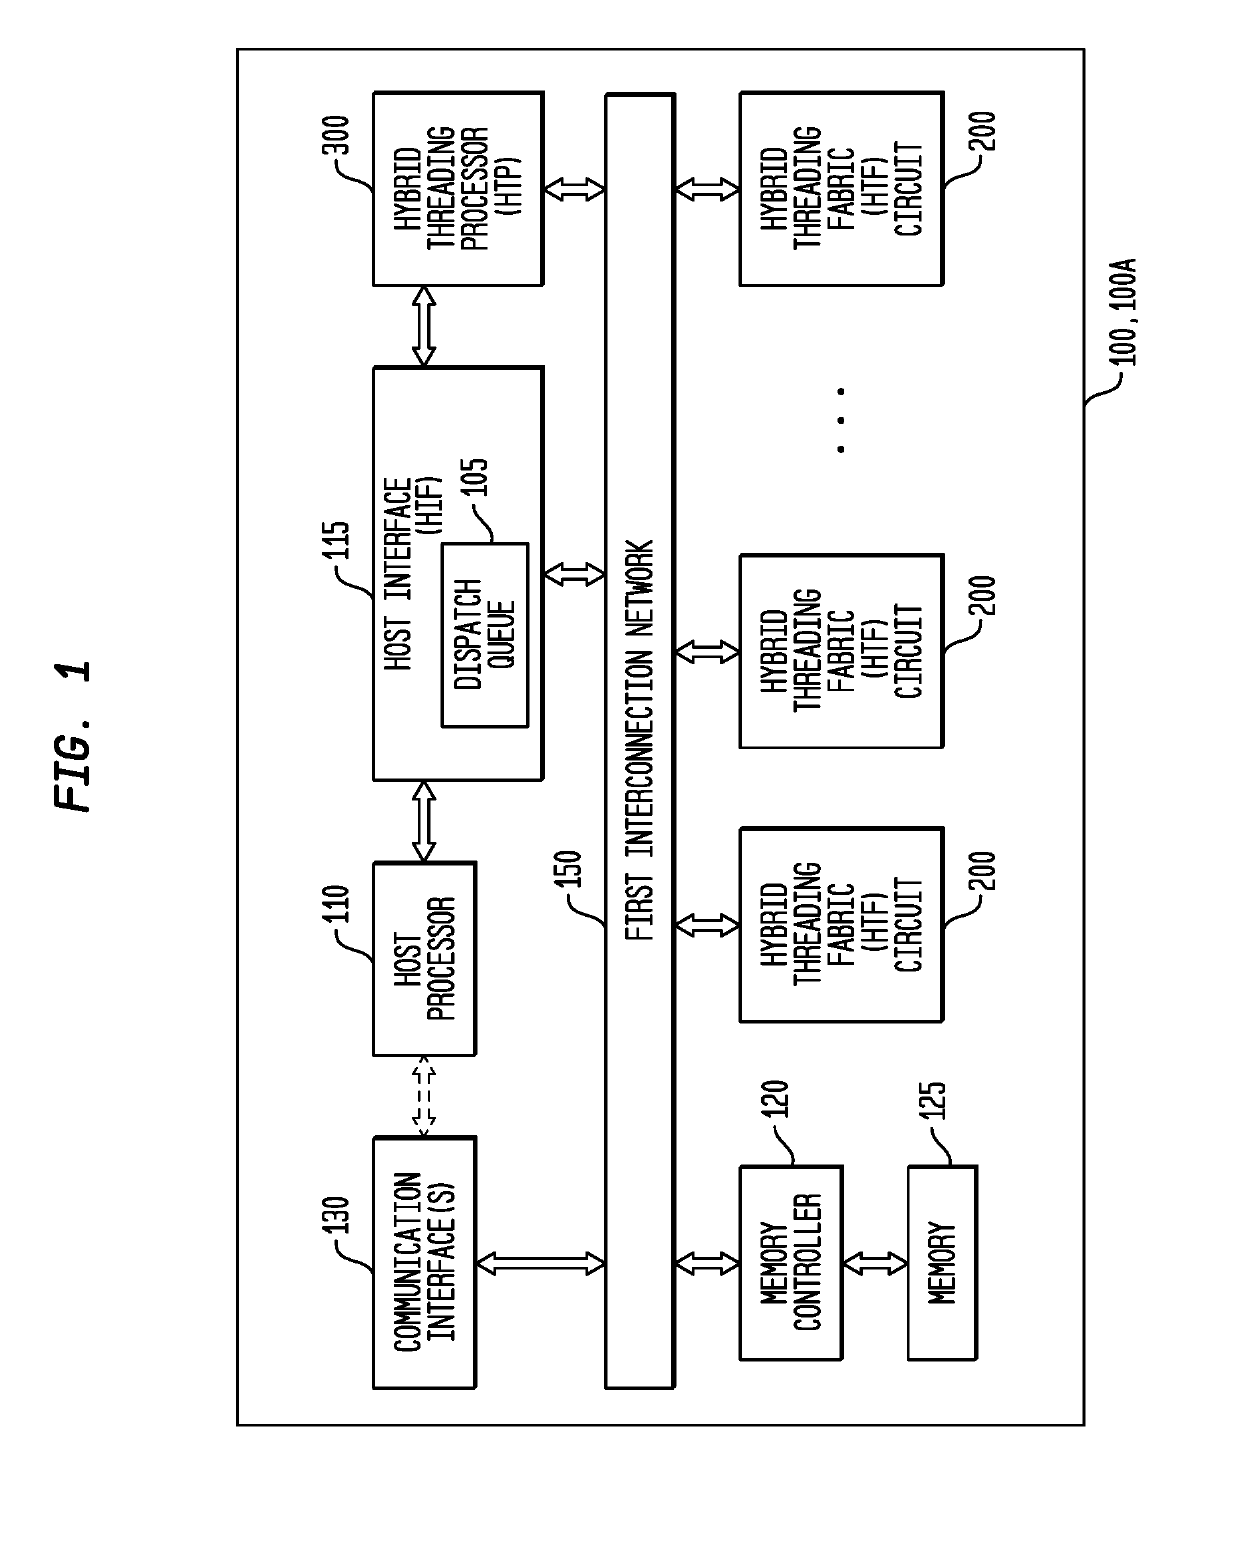 Conditional Branching Control for a Multi-Threaded, Self-Scheduling Reconfigurable Computing Fabric